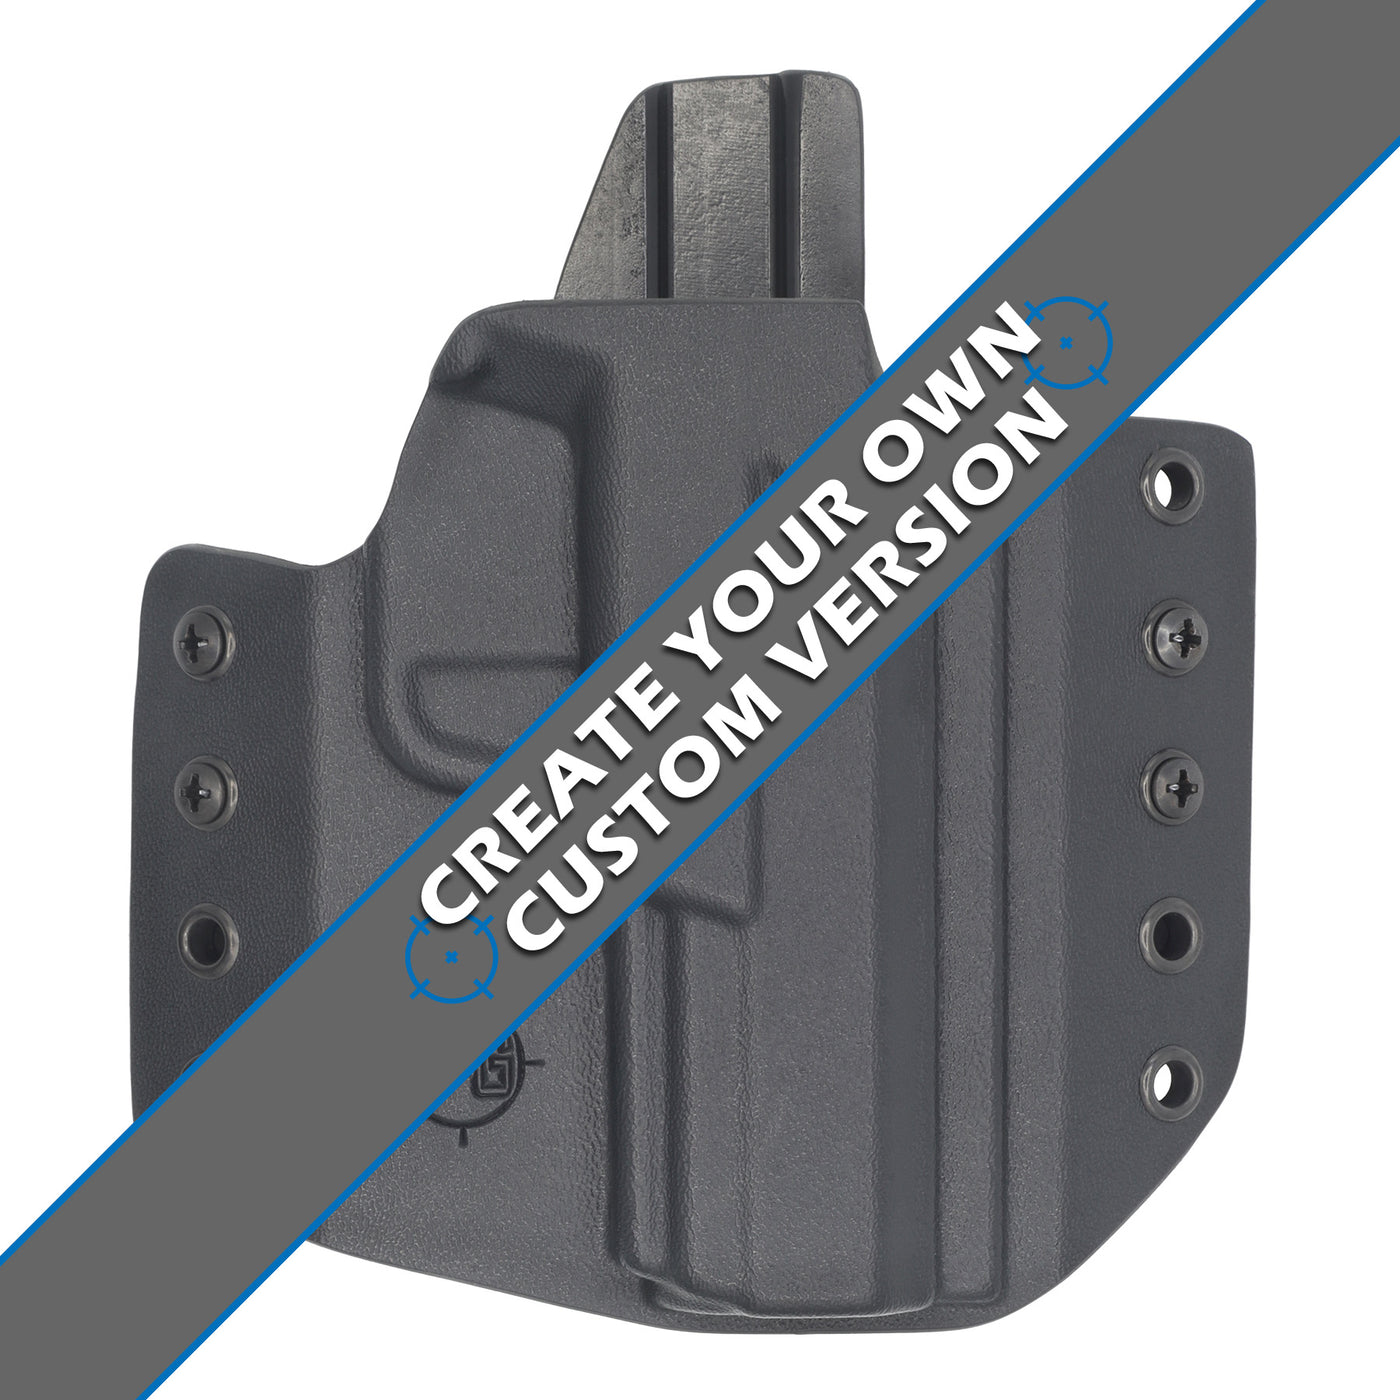 This is the custom C&G Holsters OWB inside the waistband Holster for the Ruger Security 9.